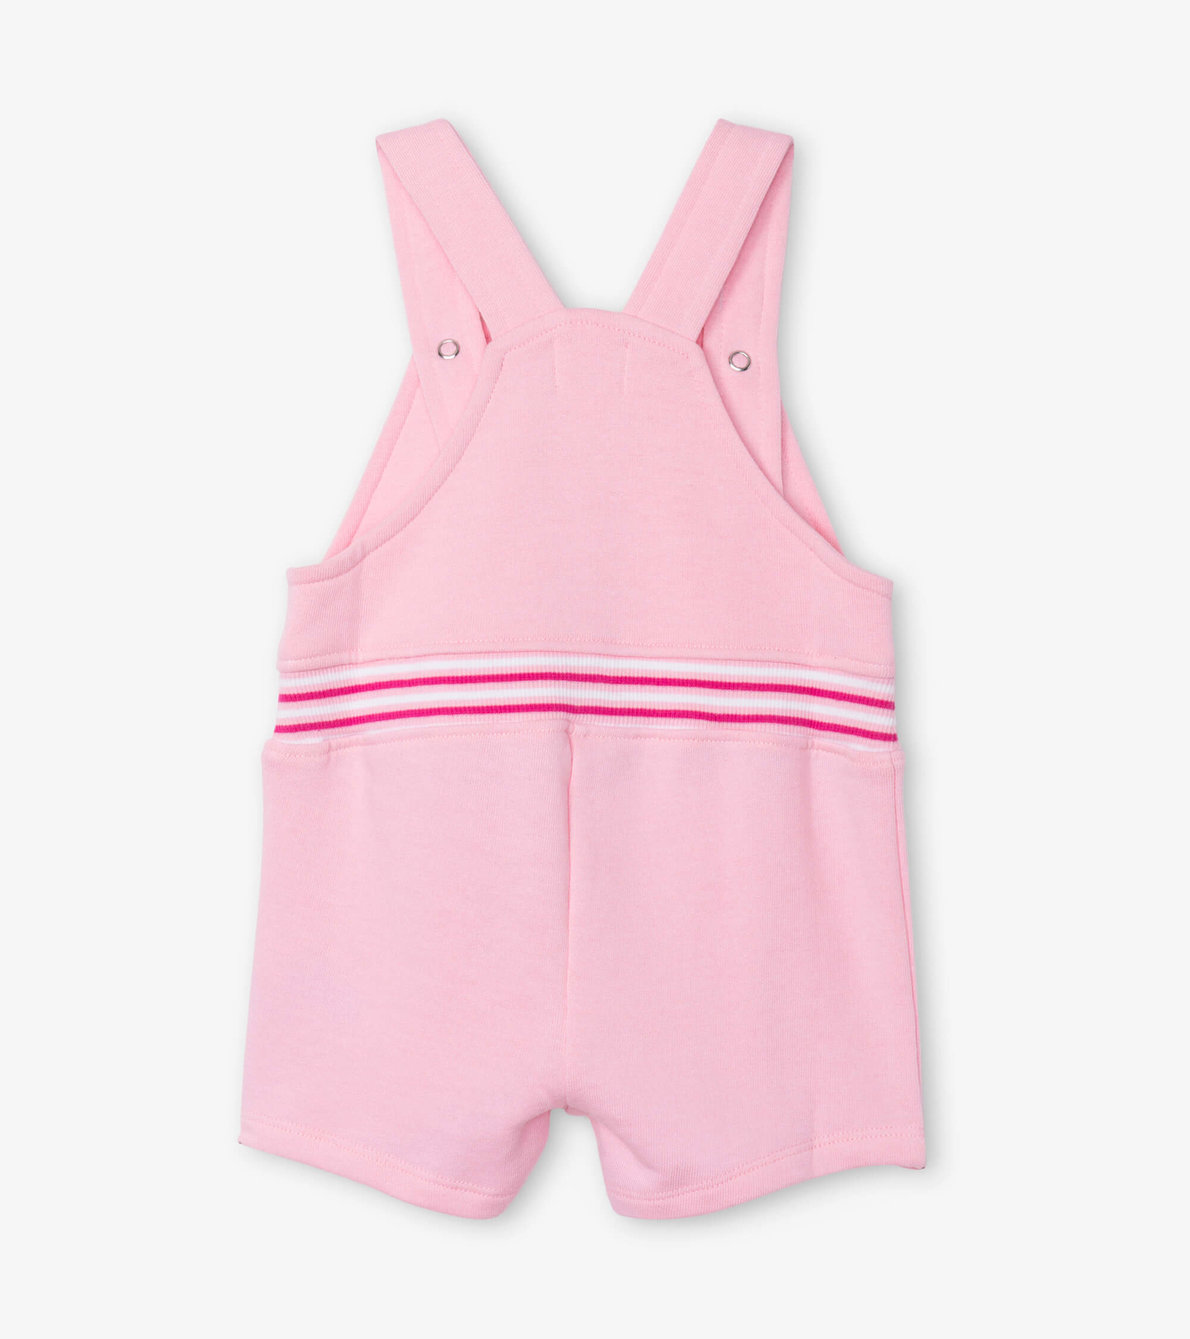 View larger image of Candy Pink Baby Overalls